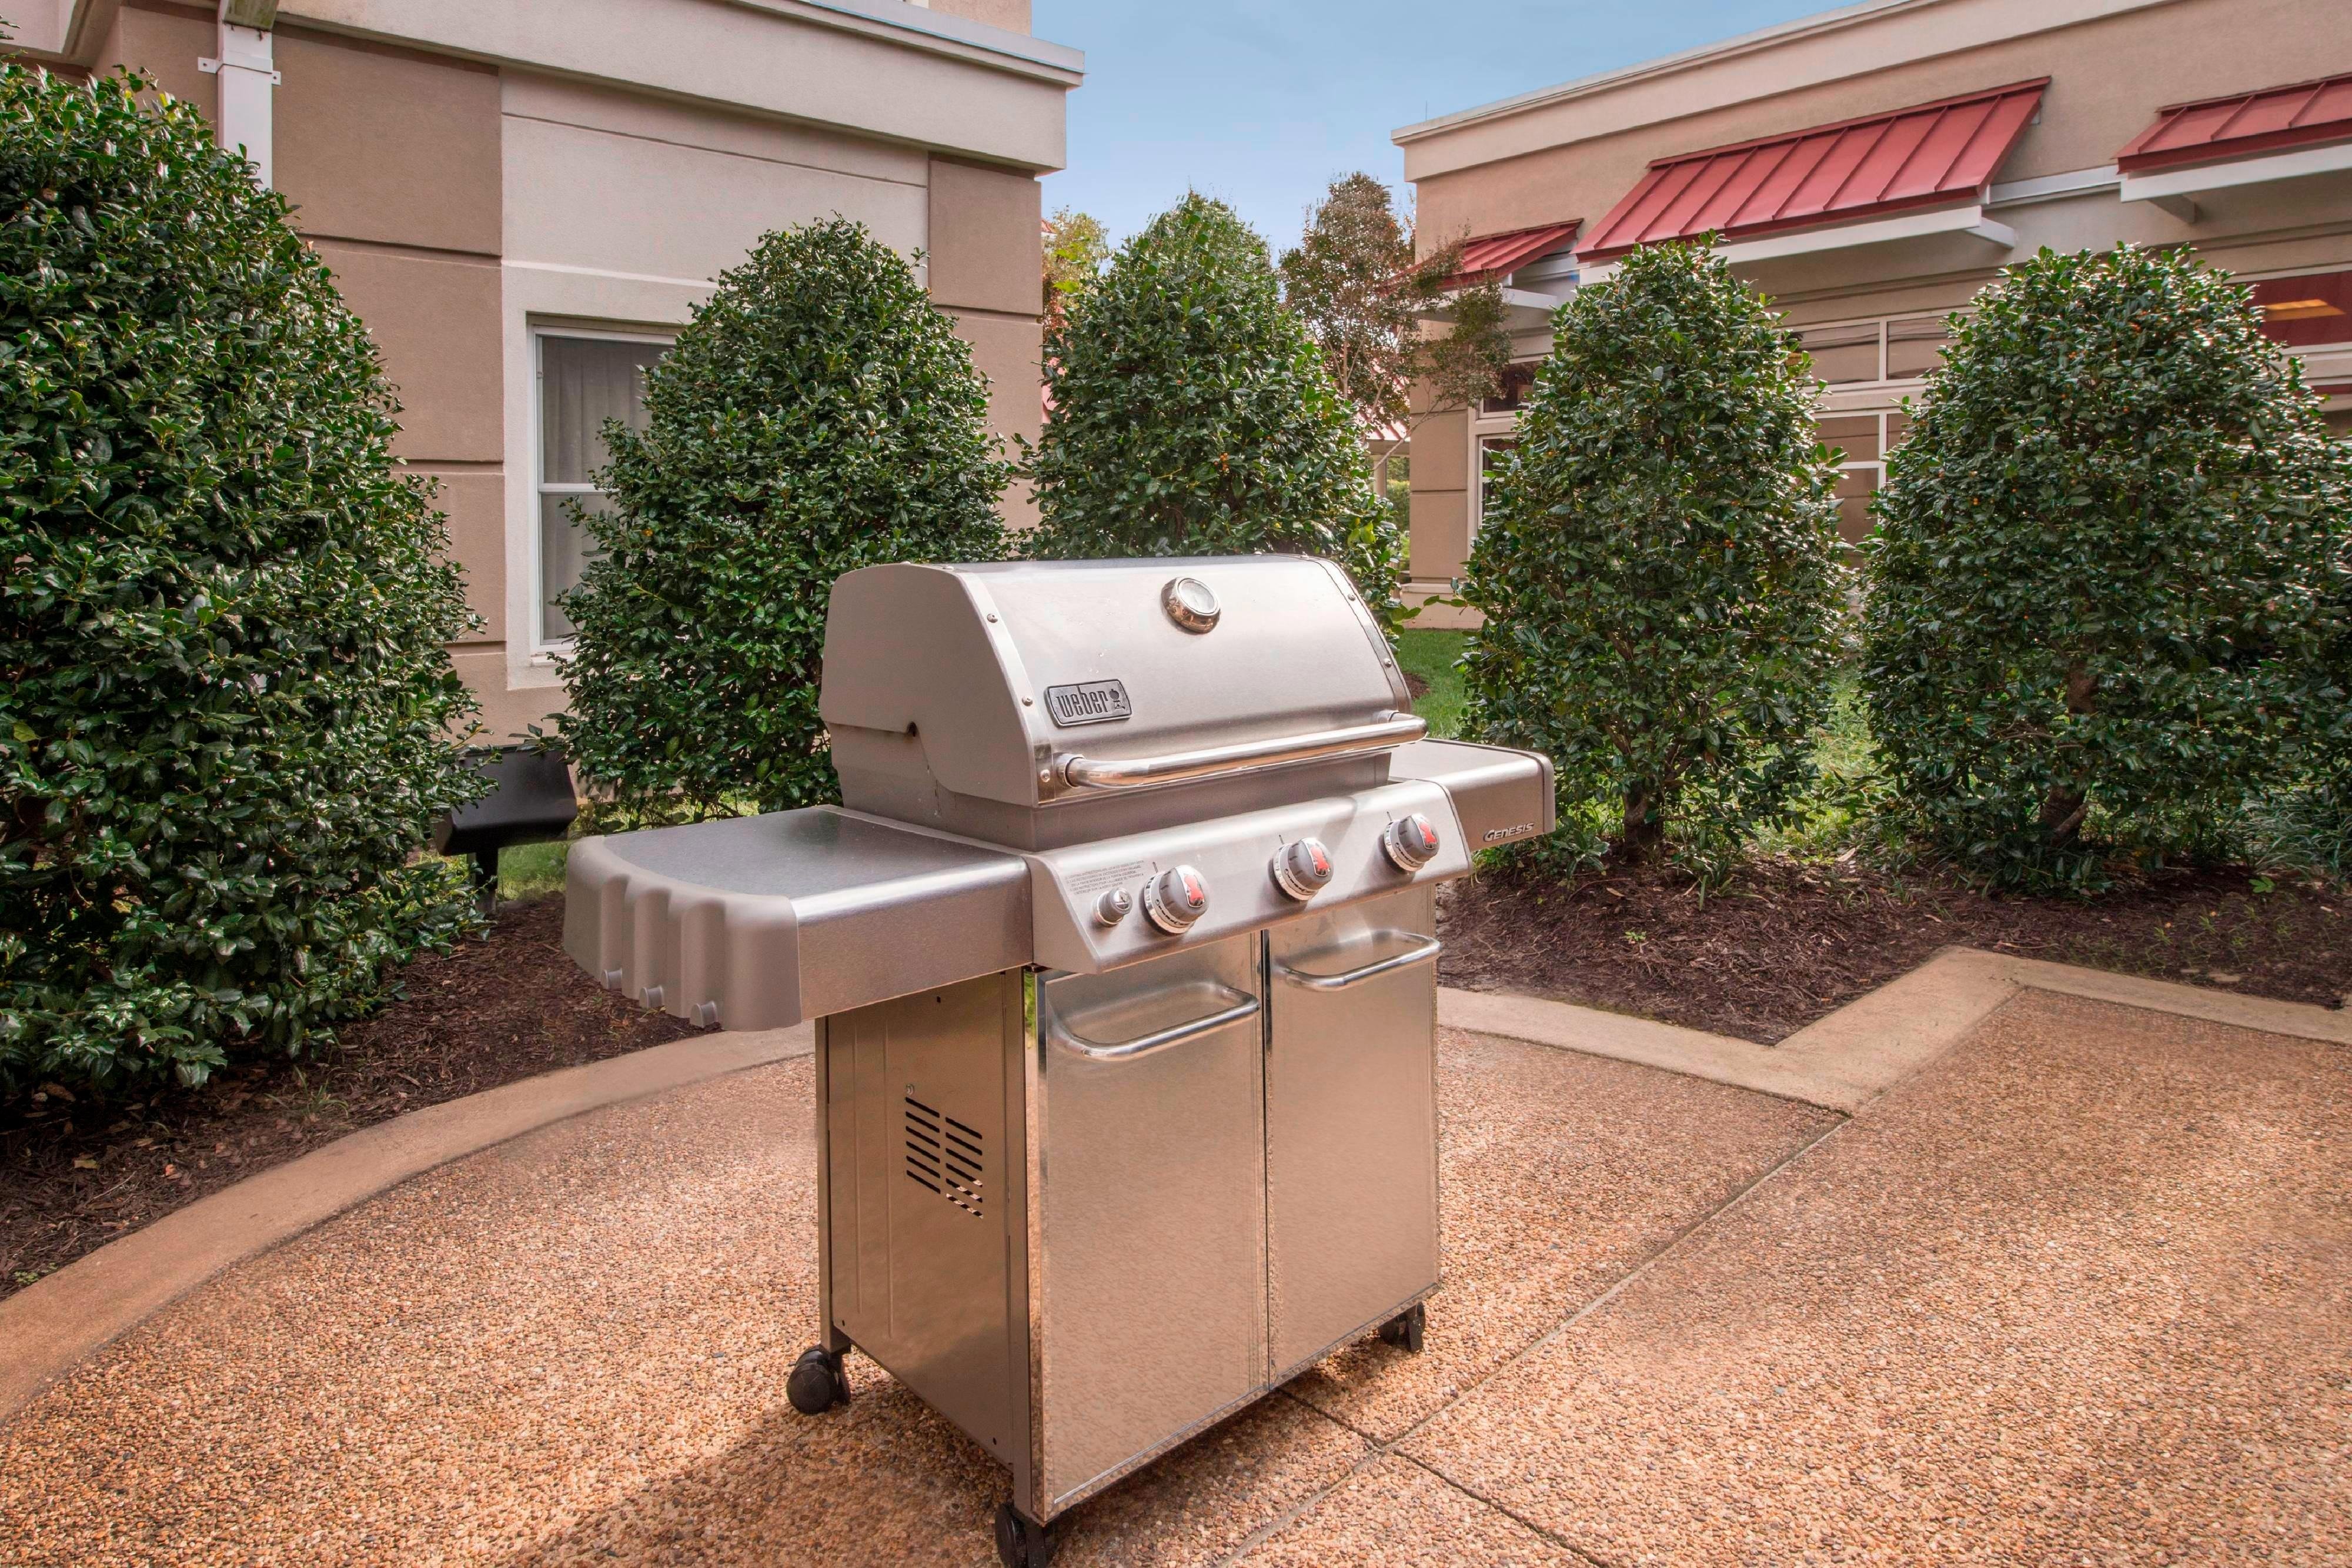 BBQ Grills are Available for Guest Use